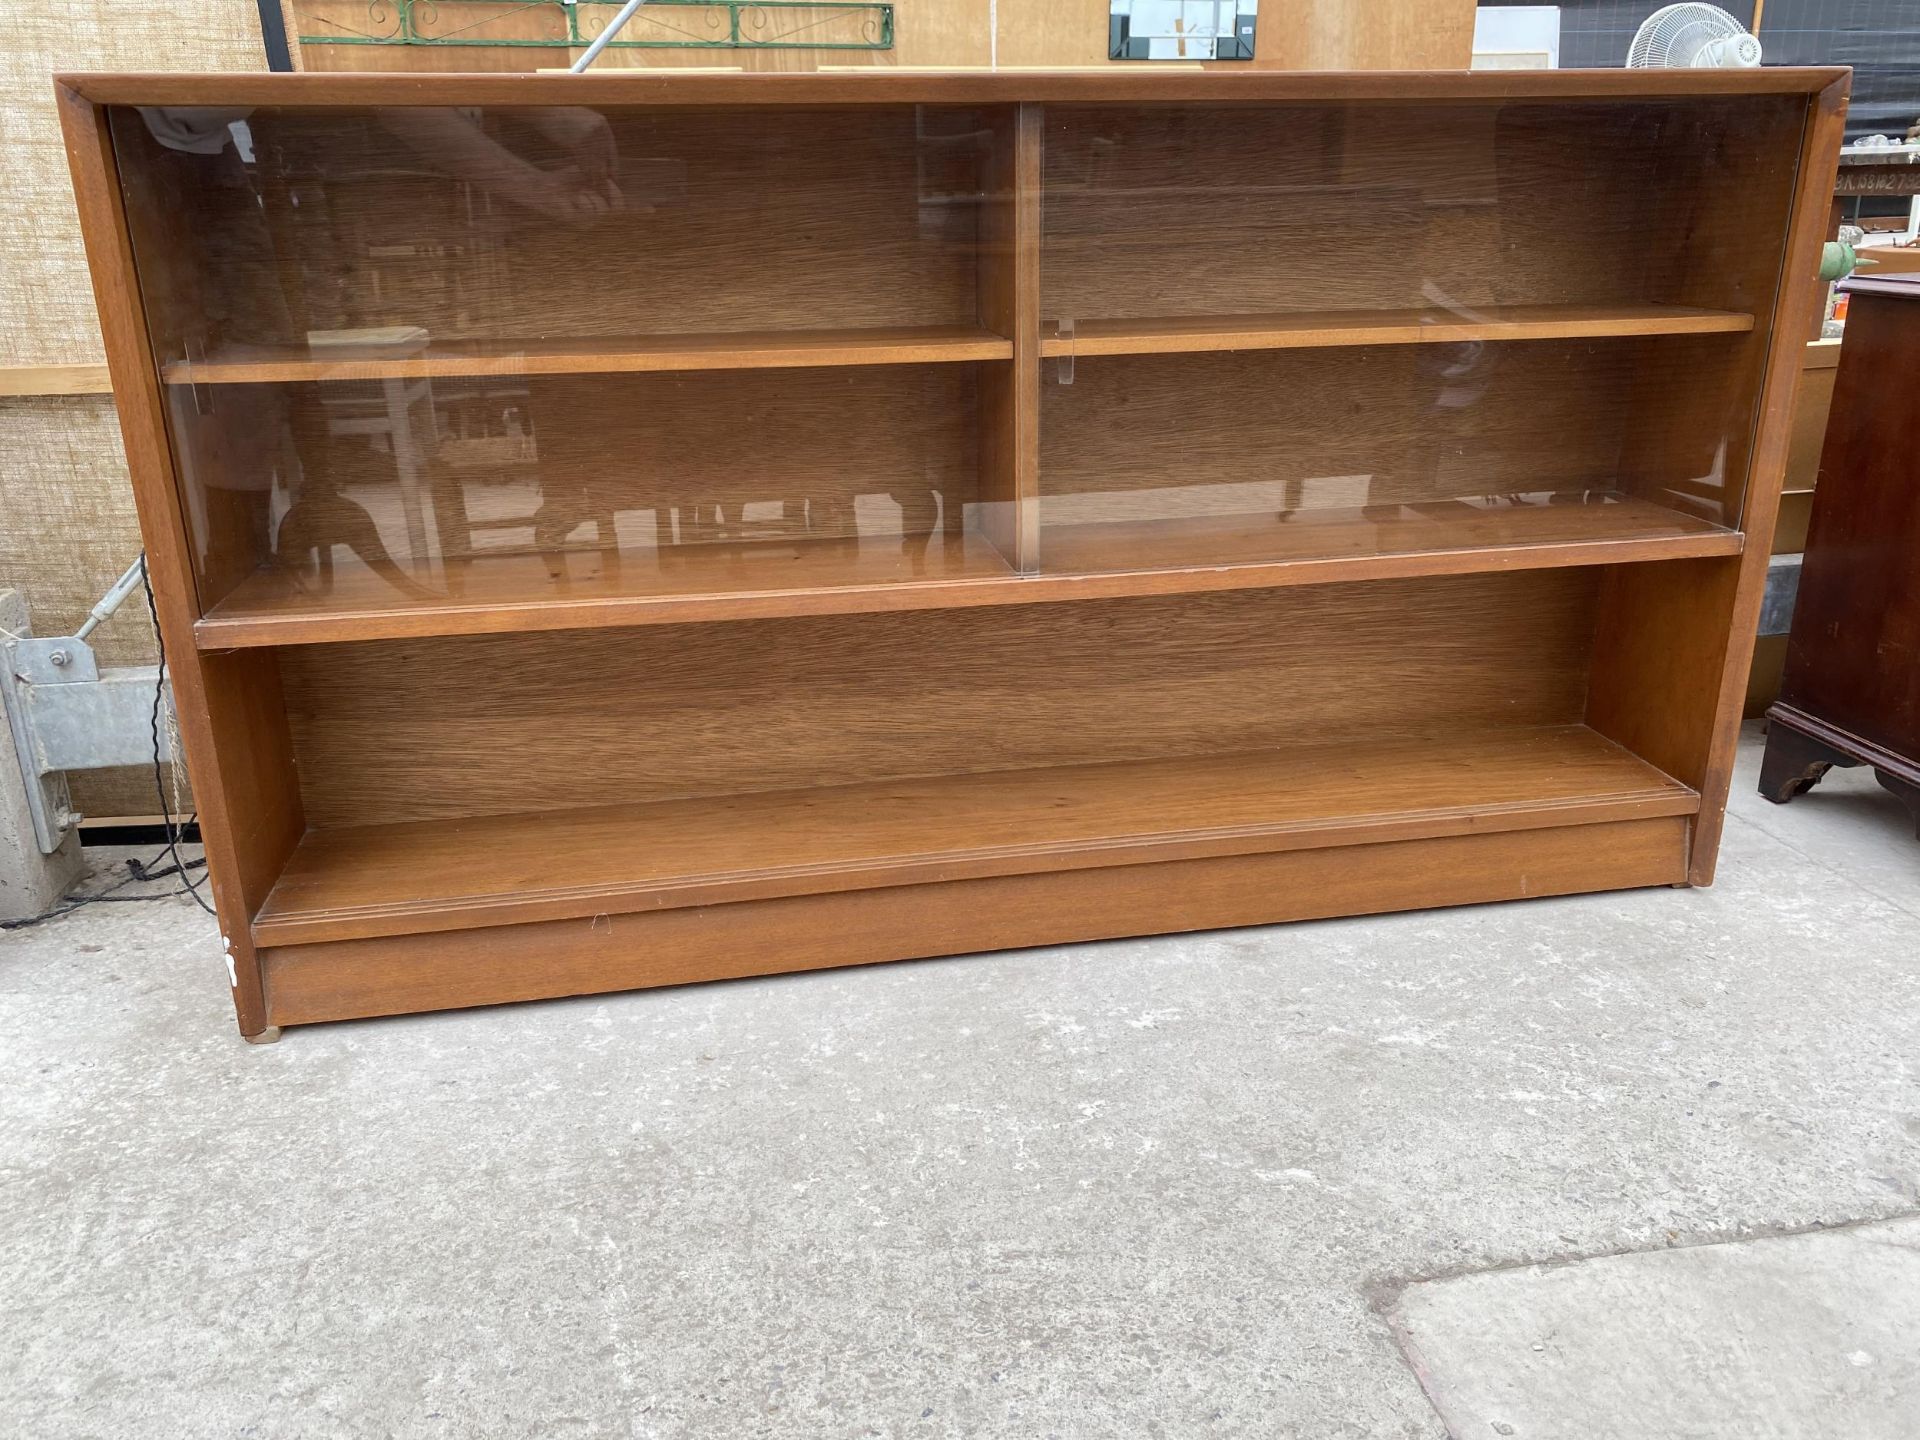 A RETRO TEAK HERBENT AND GIBBS GLASS FRAMED BOOKCASE 60" WIDE - Image 2 of 6